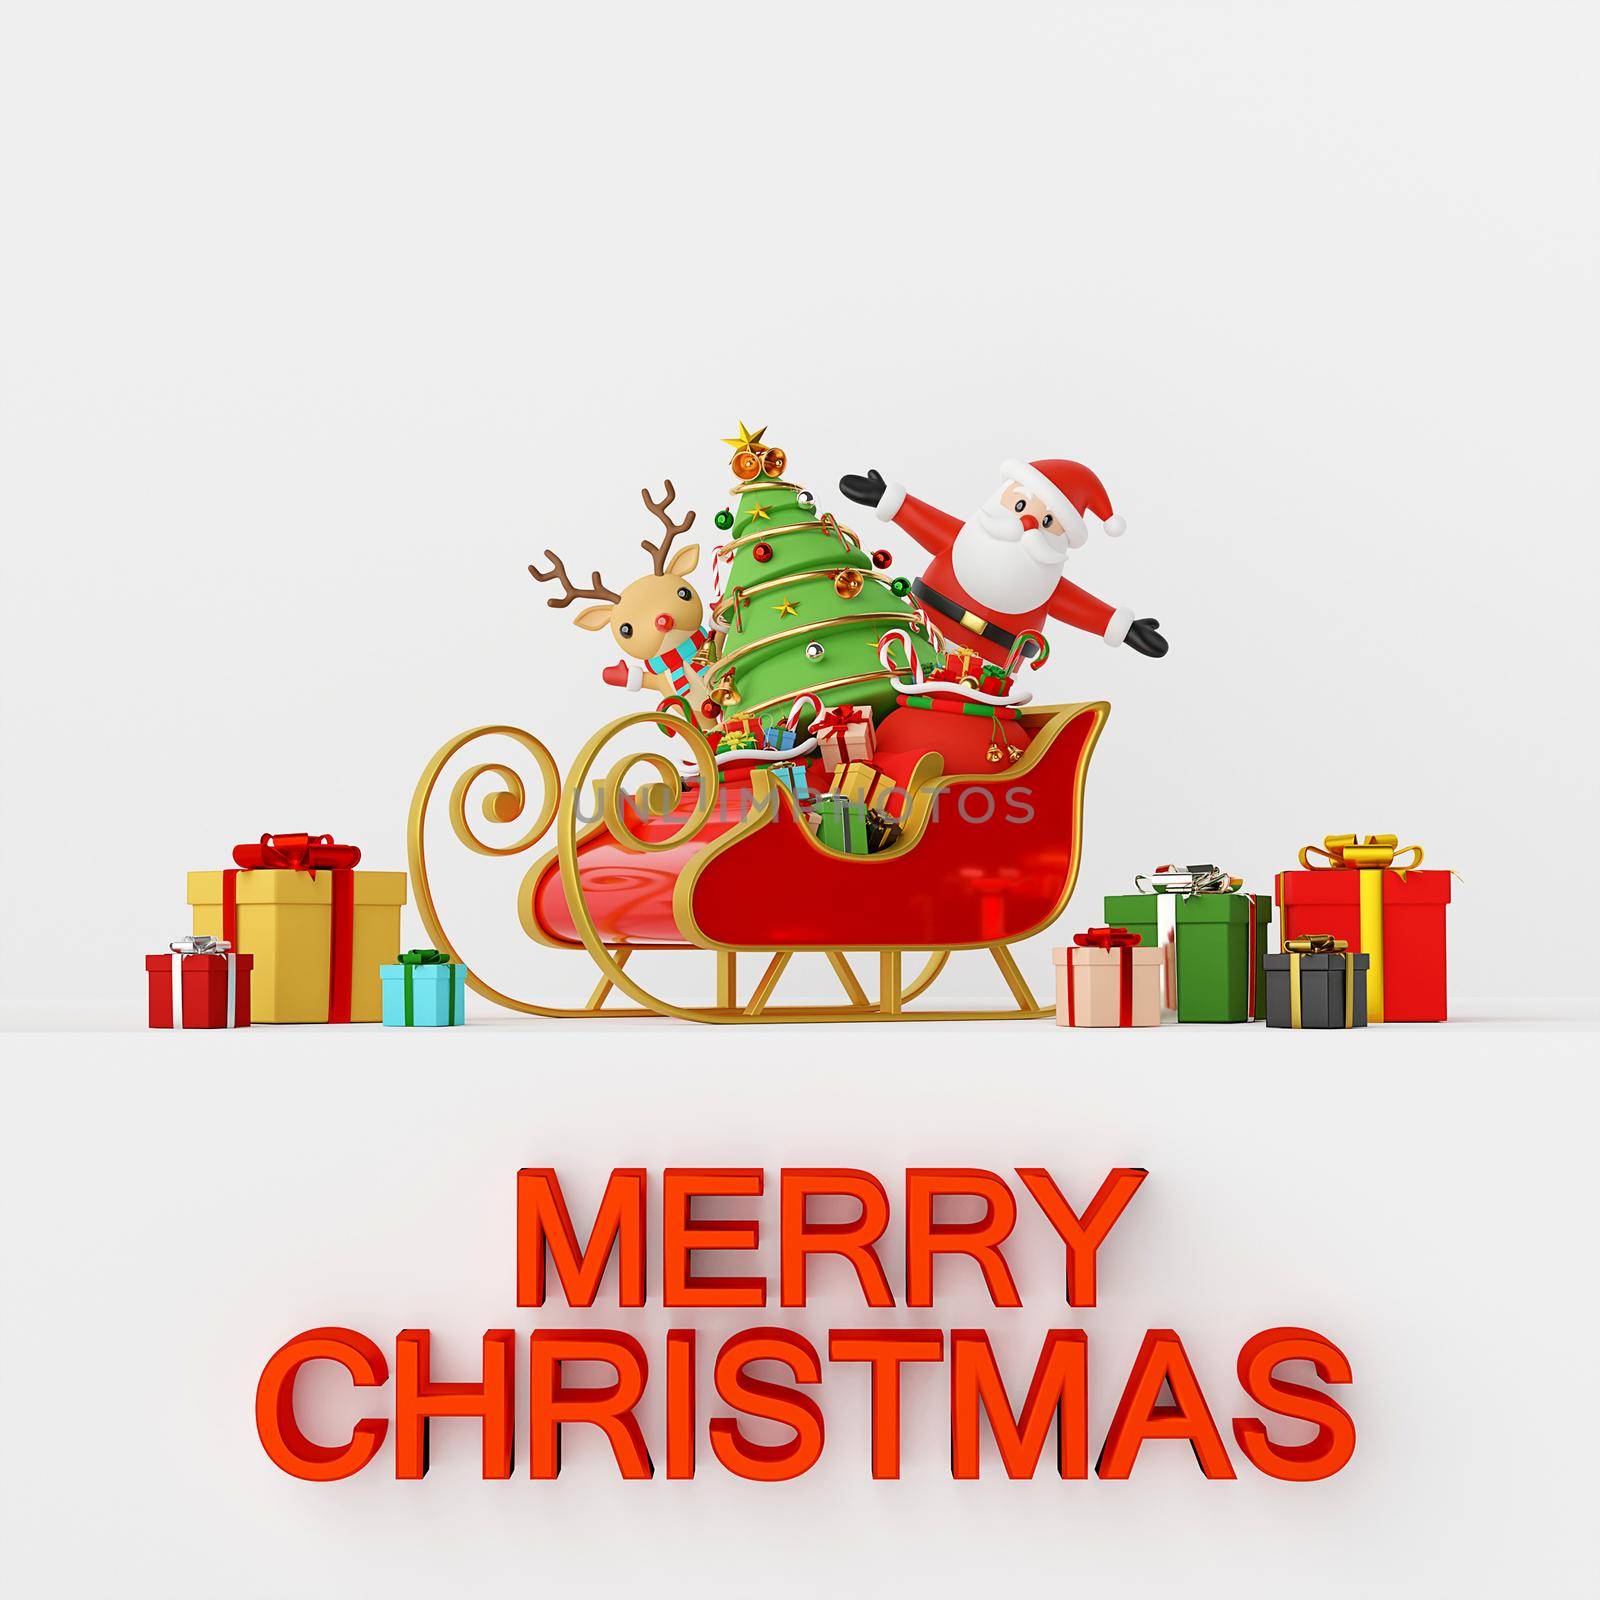 Merry Christmas and Happy New Year, Santa Claus and reindeer with sleigh full of gifts, 3d rendering